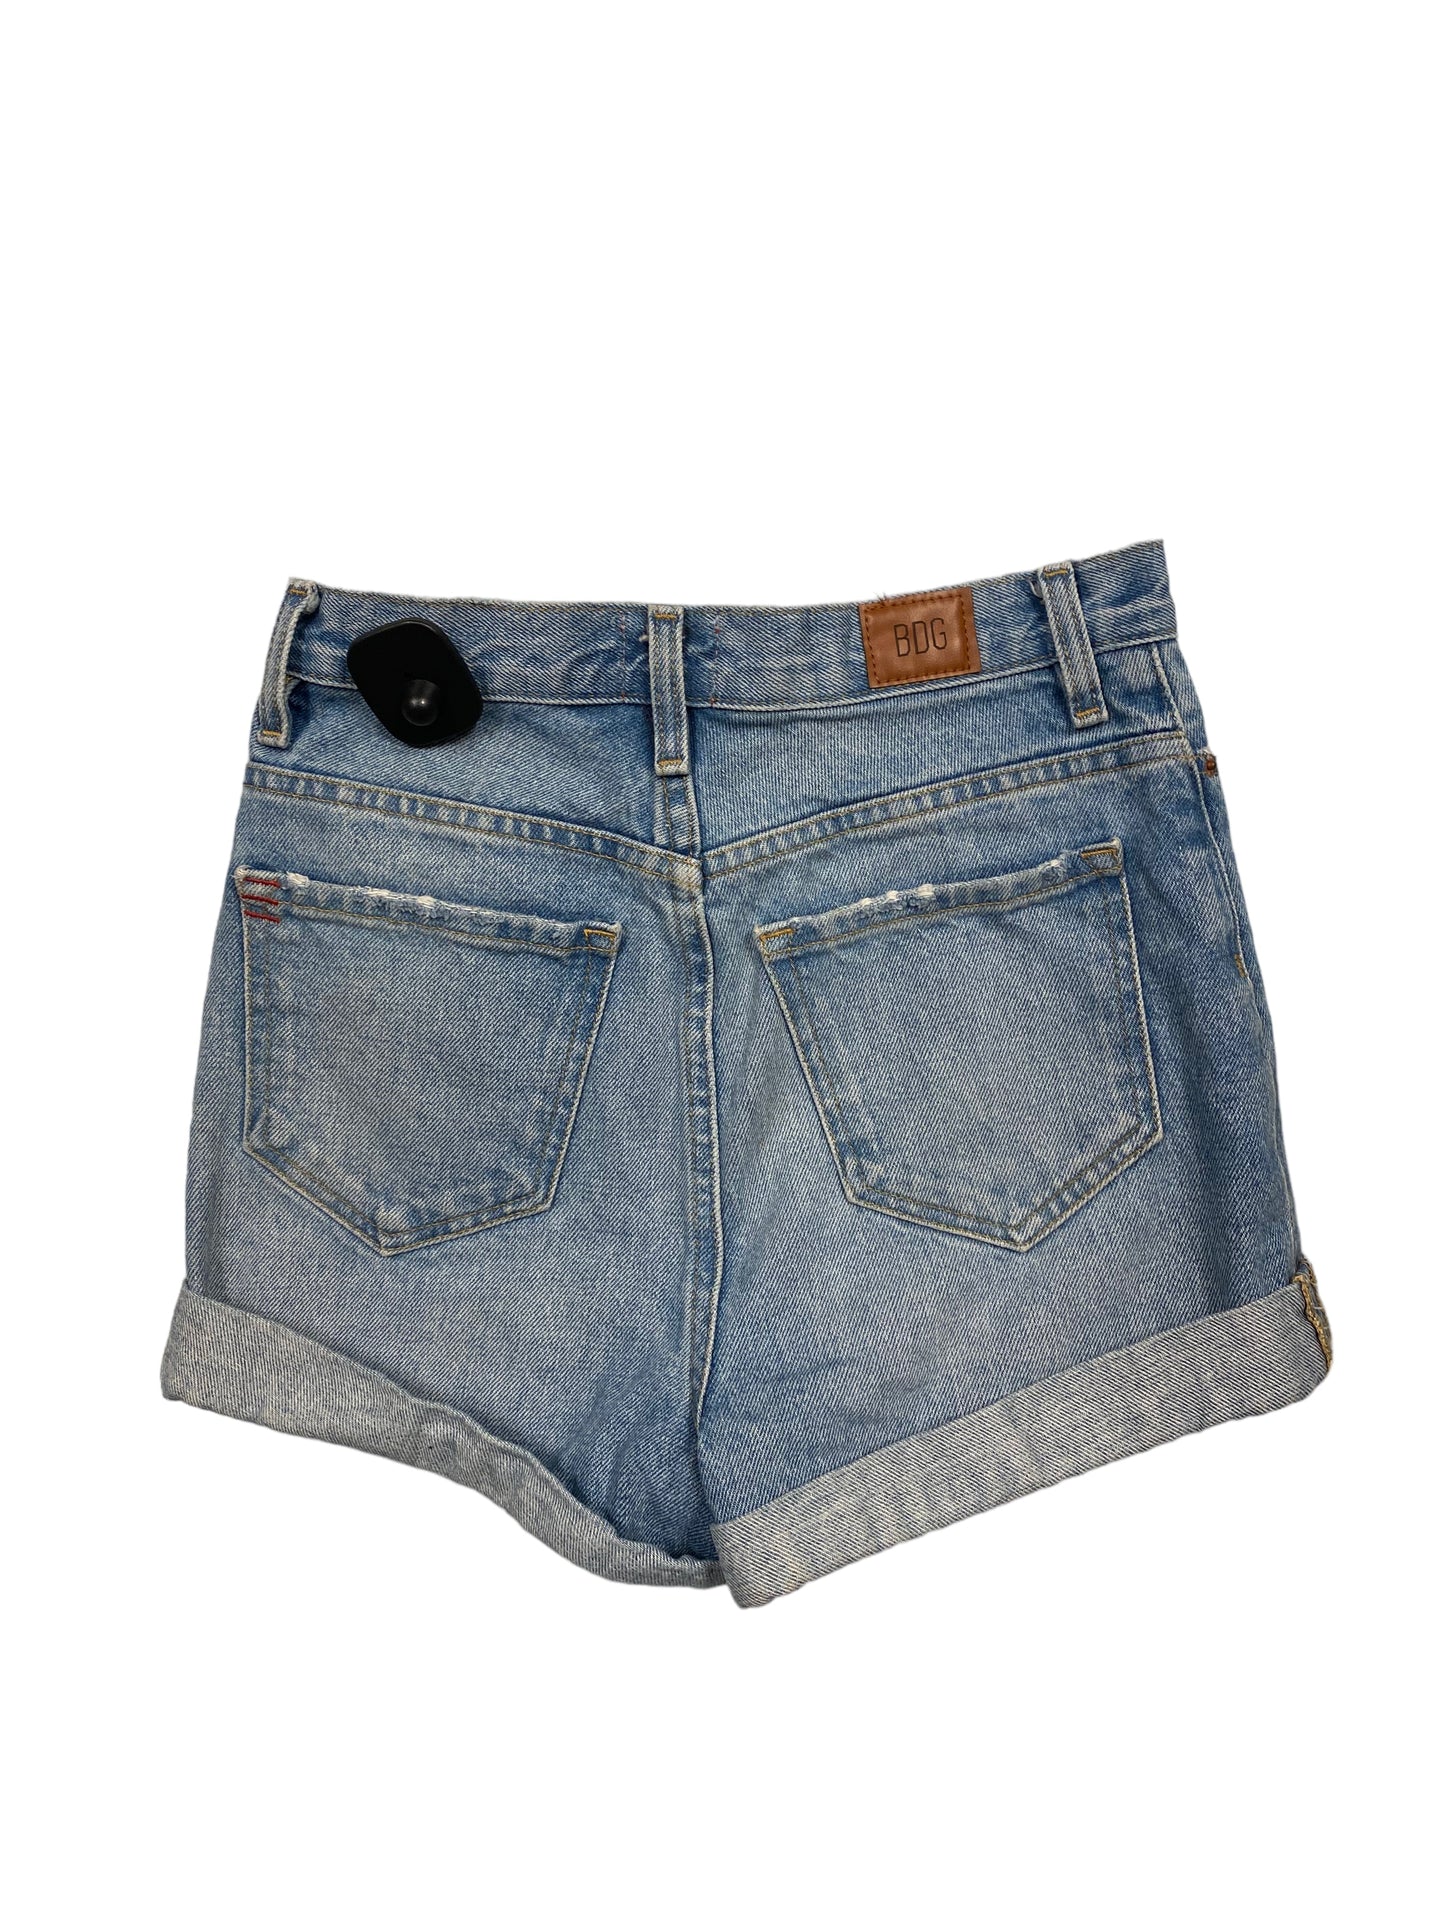 Shorts By Bdg  Size: 0